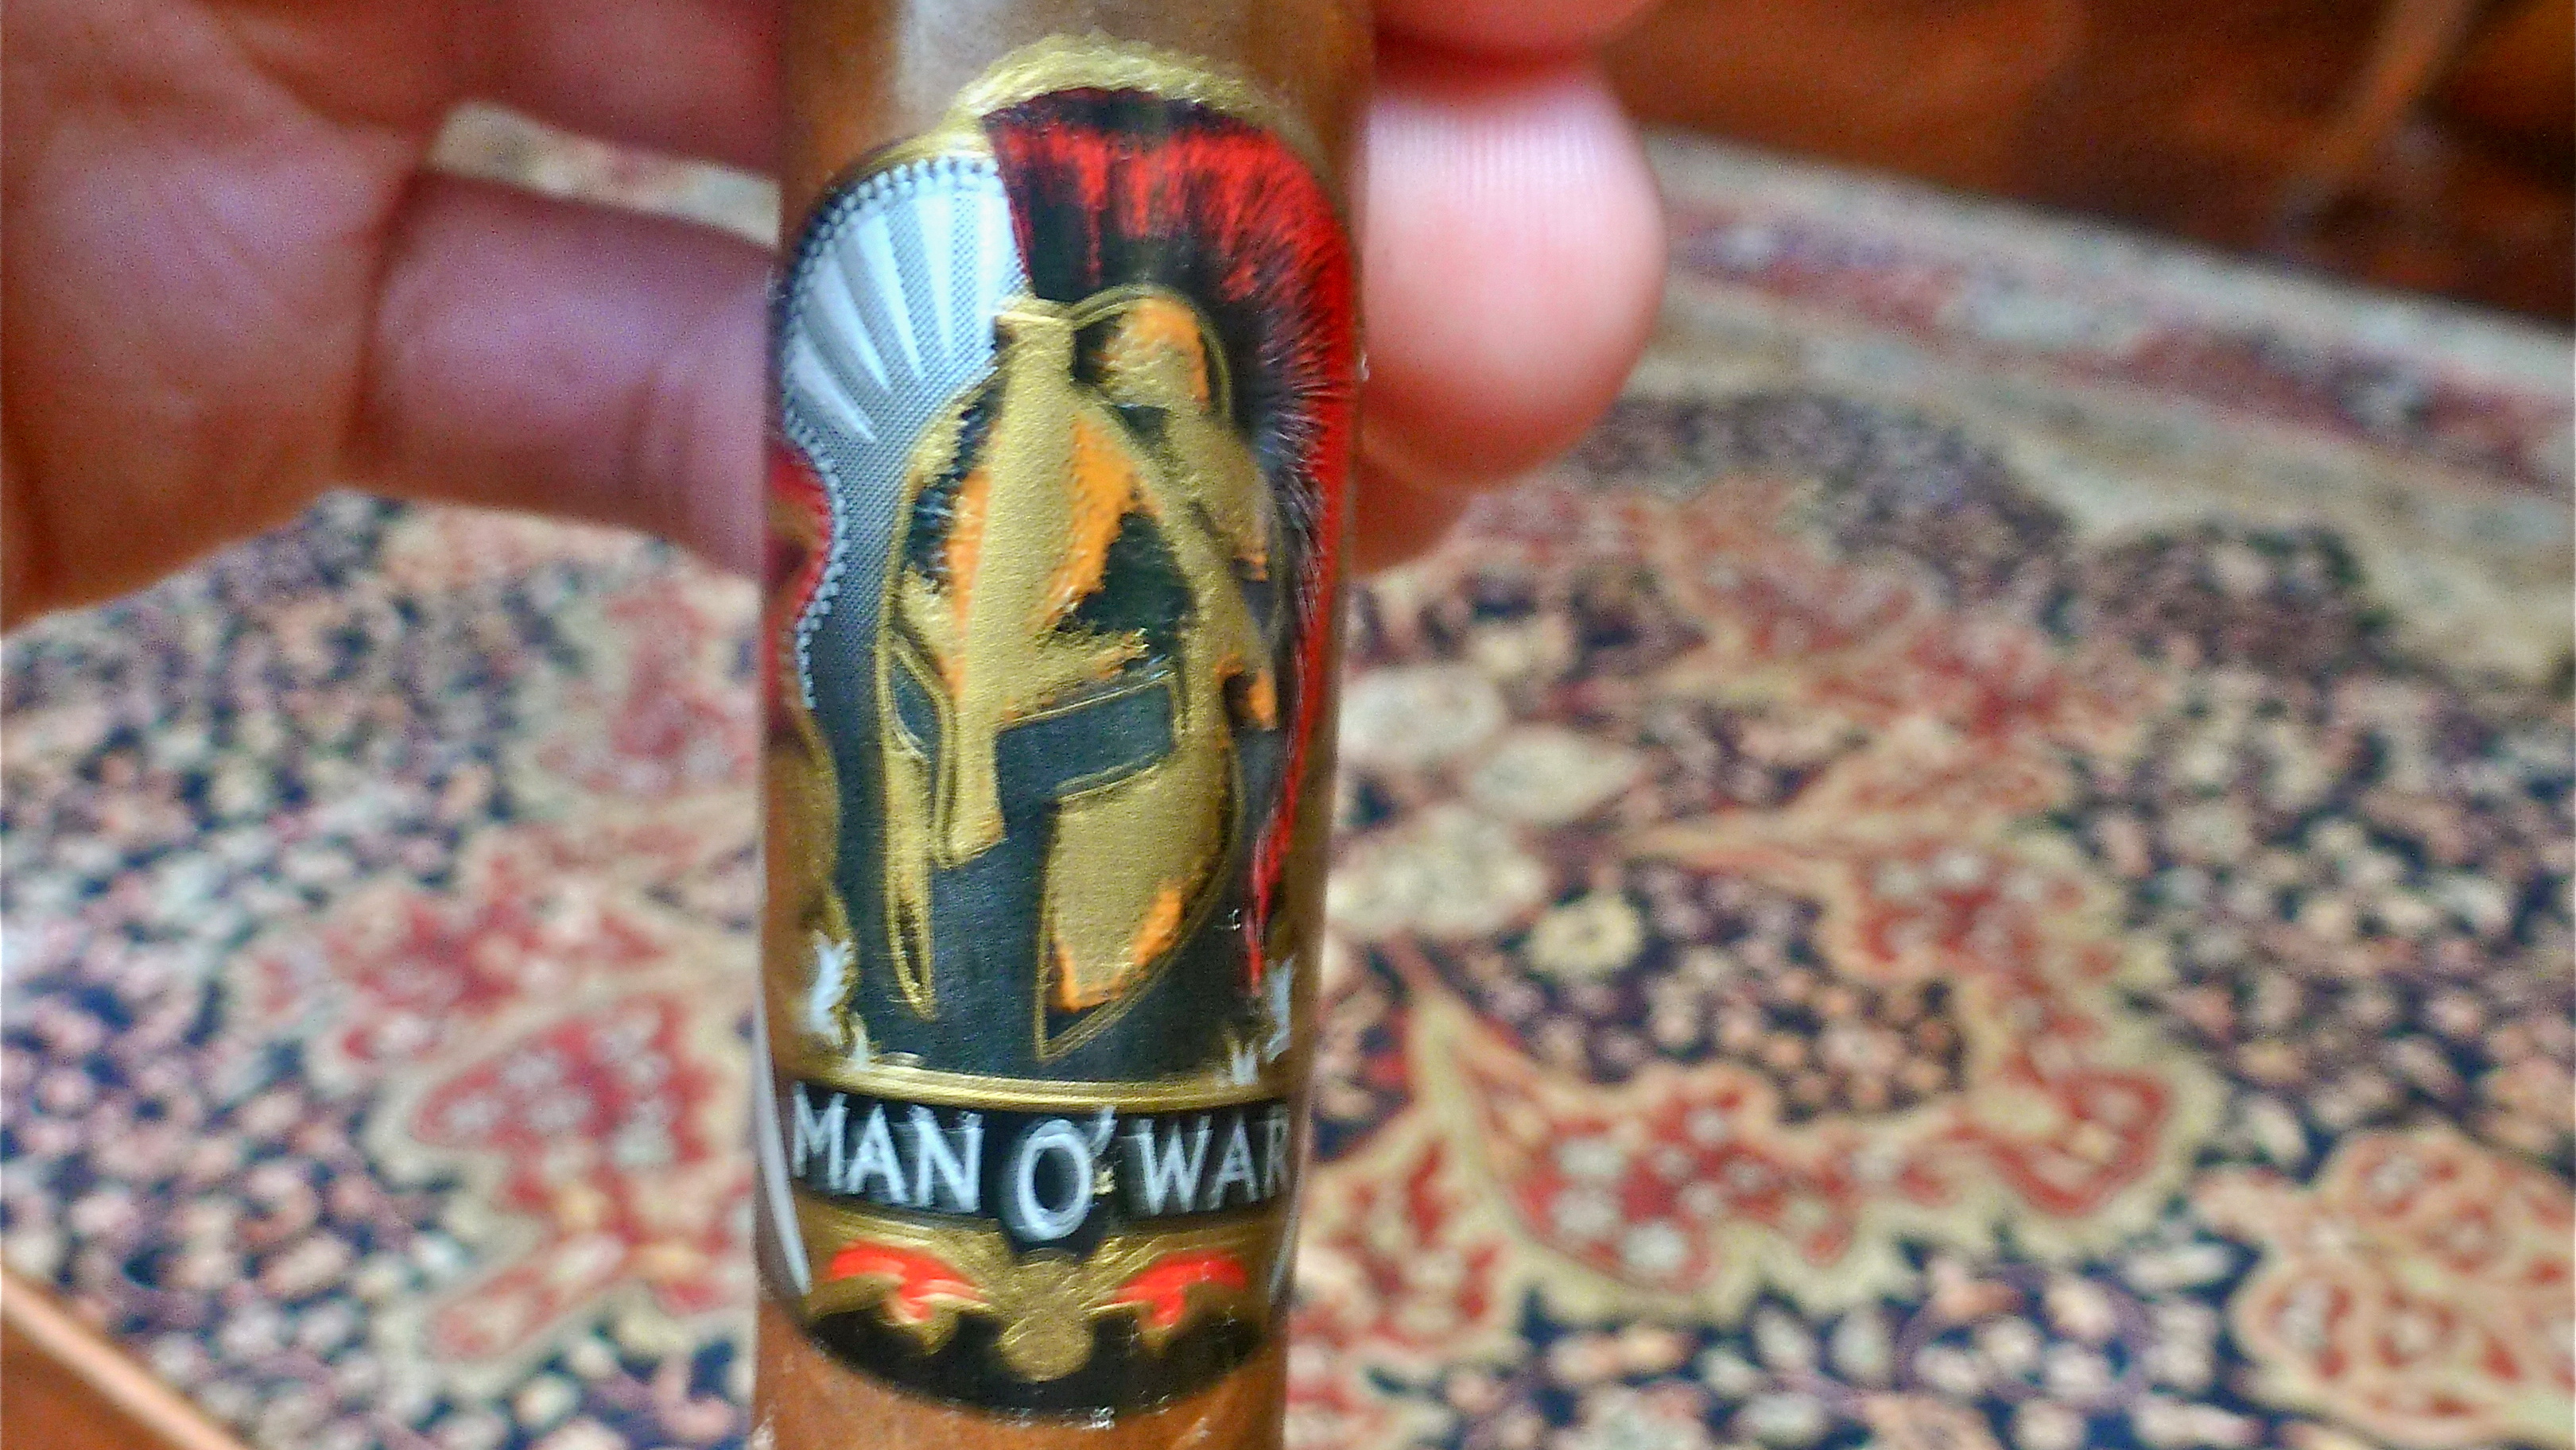 Zack The Stogie Man: Man O War Side Project 52C Review